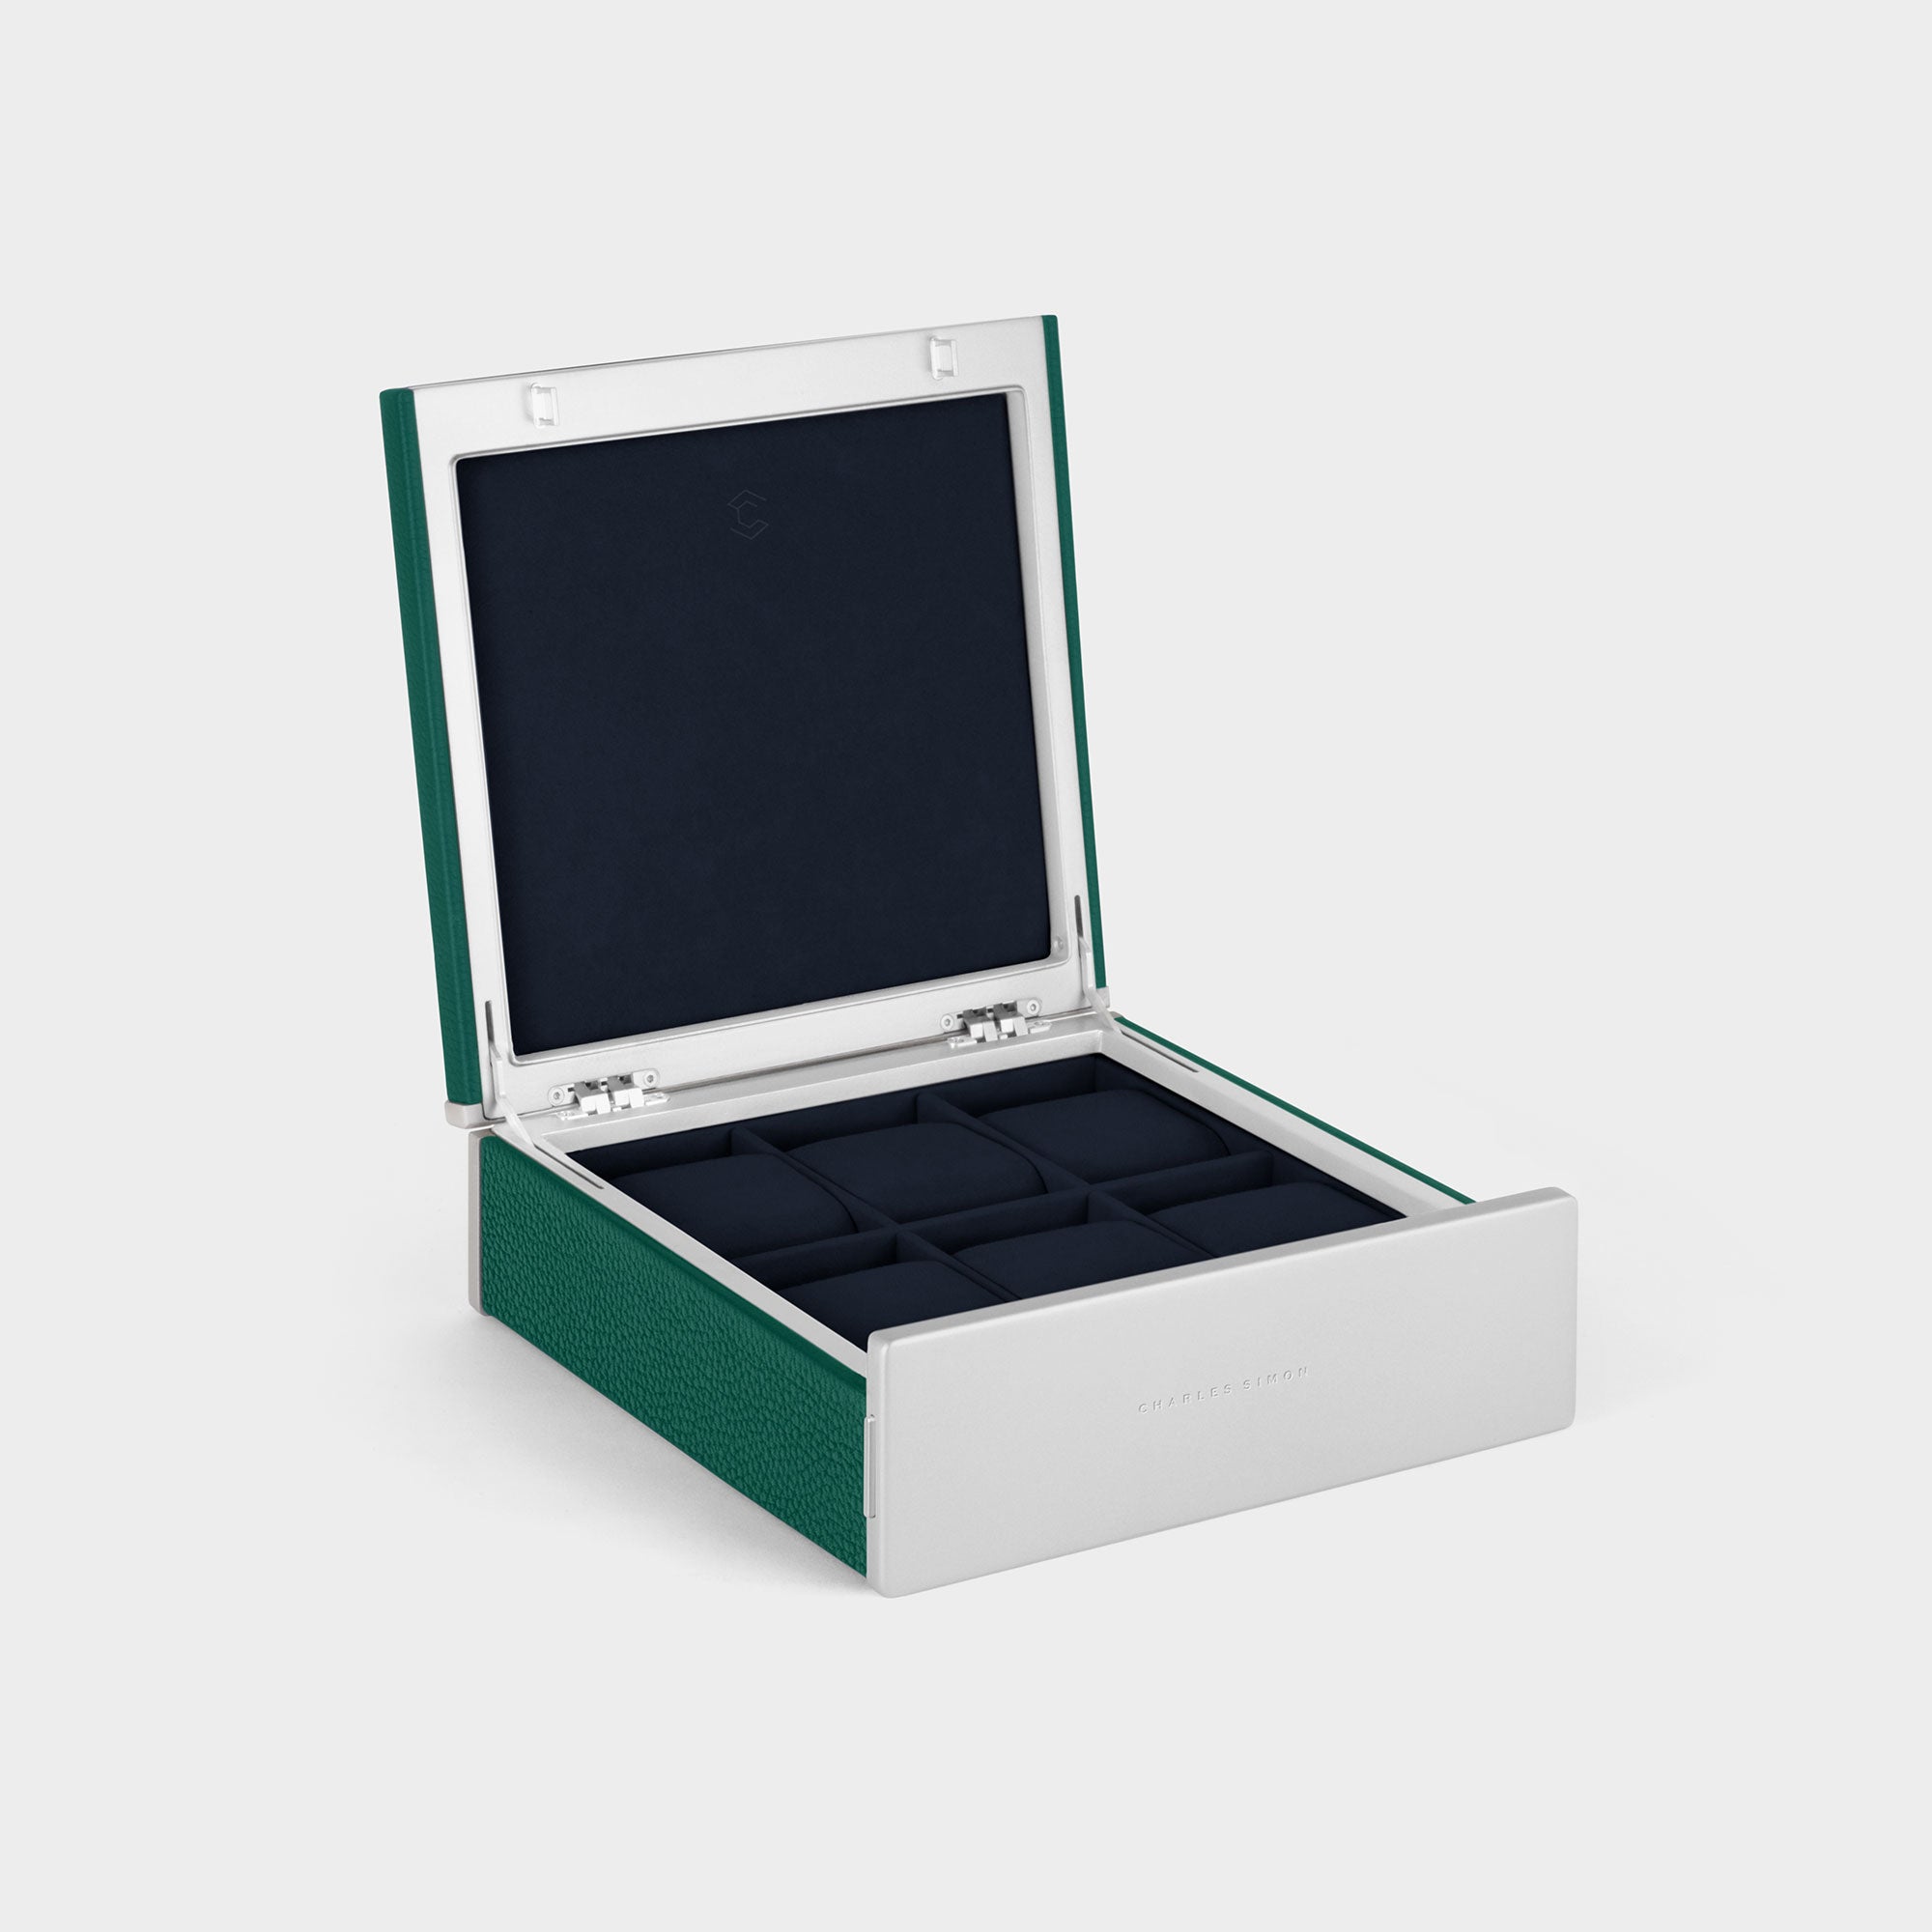 Handmade watch box for 6 watches in emerald leather, carbon fiber and anodized aluminum casing and Alcantara interior